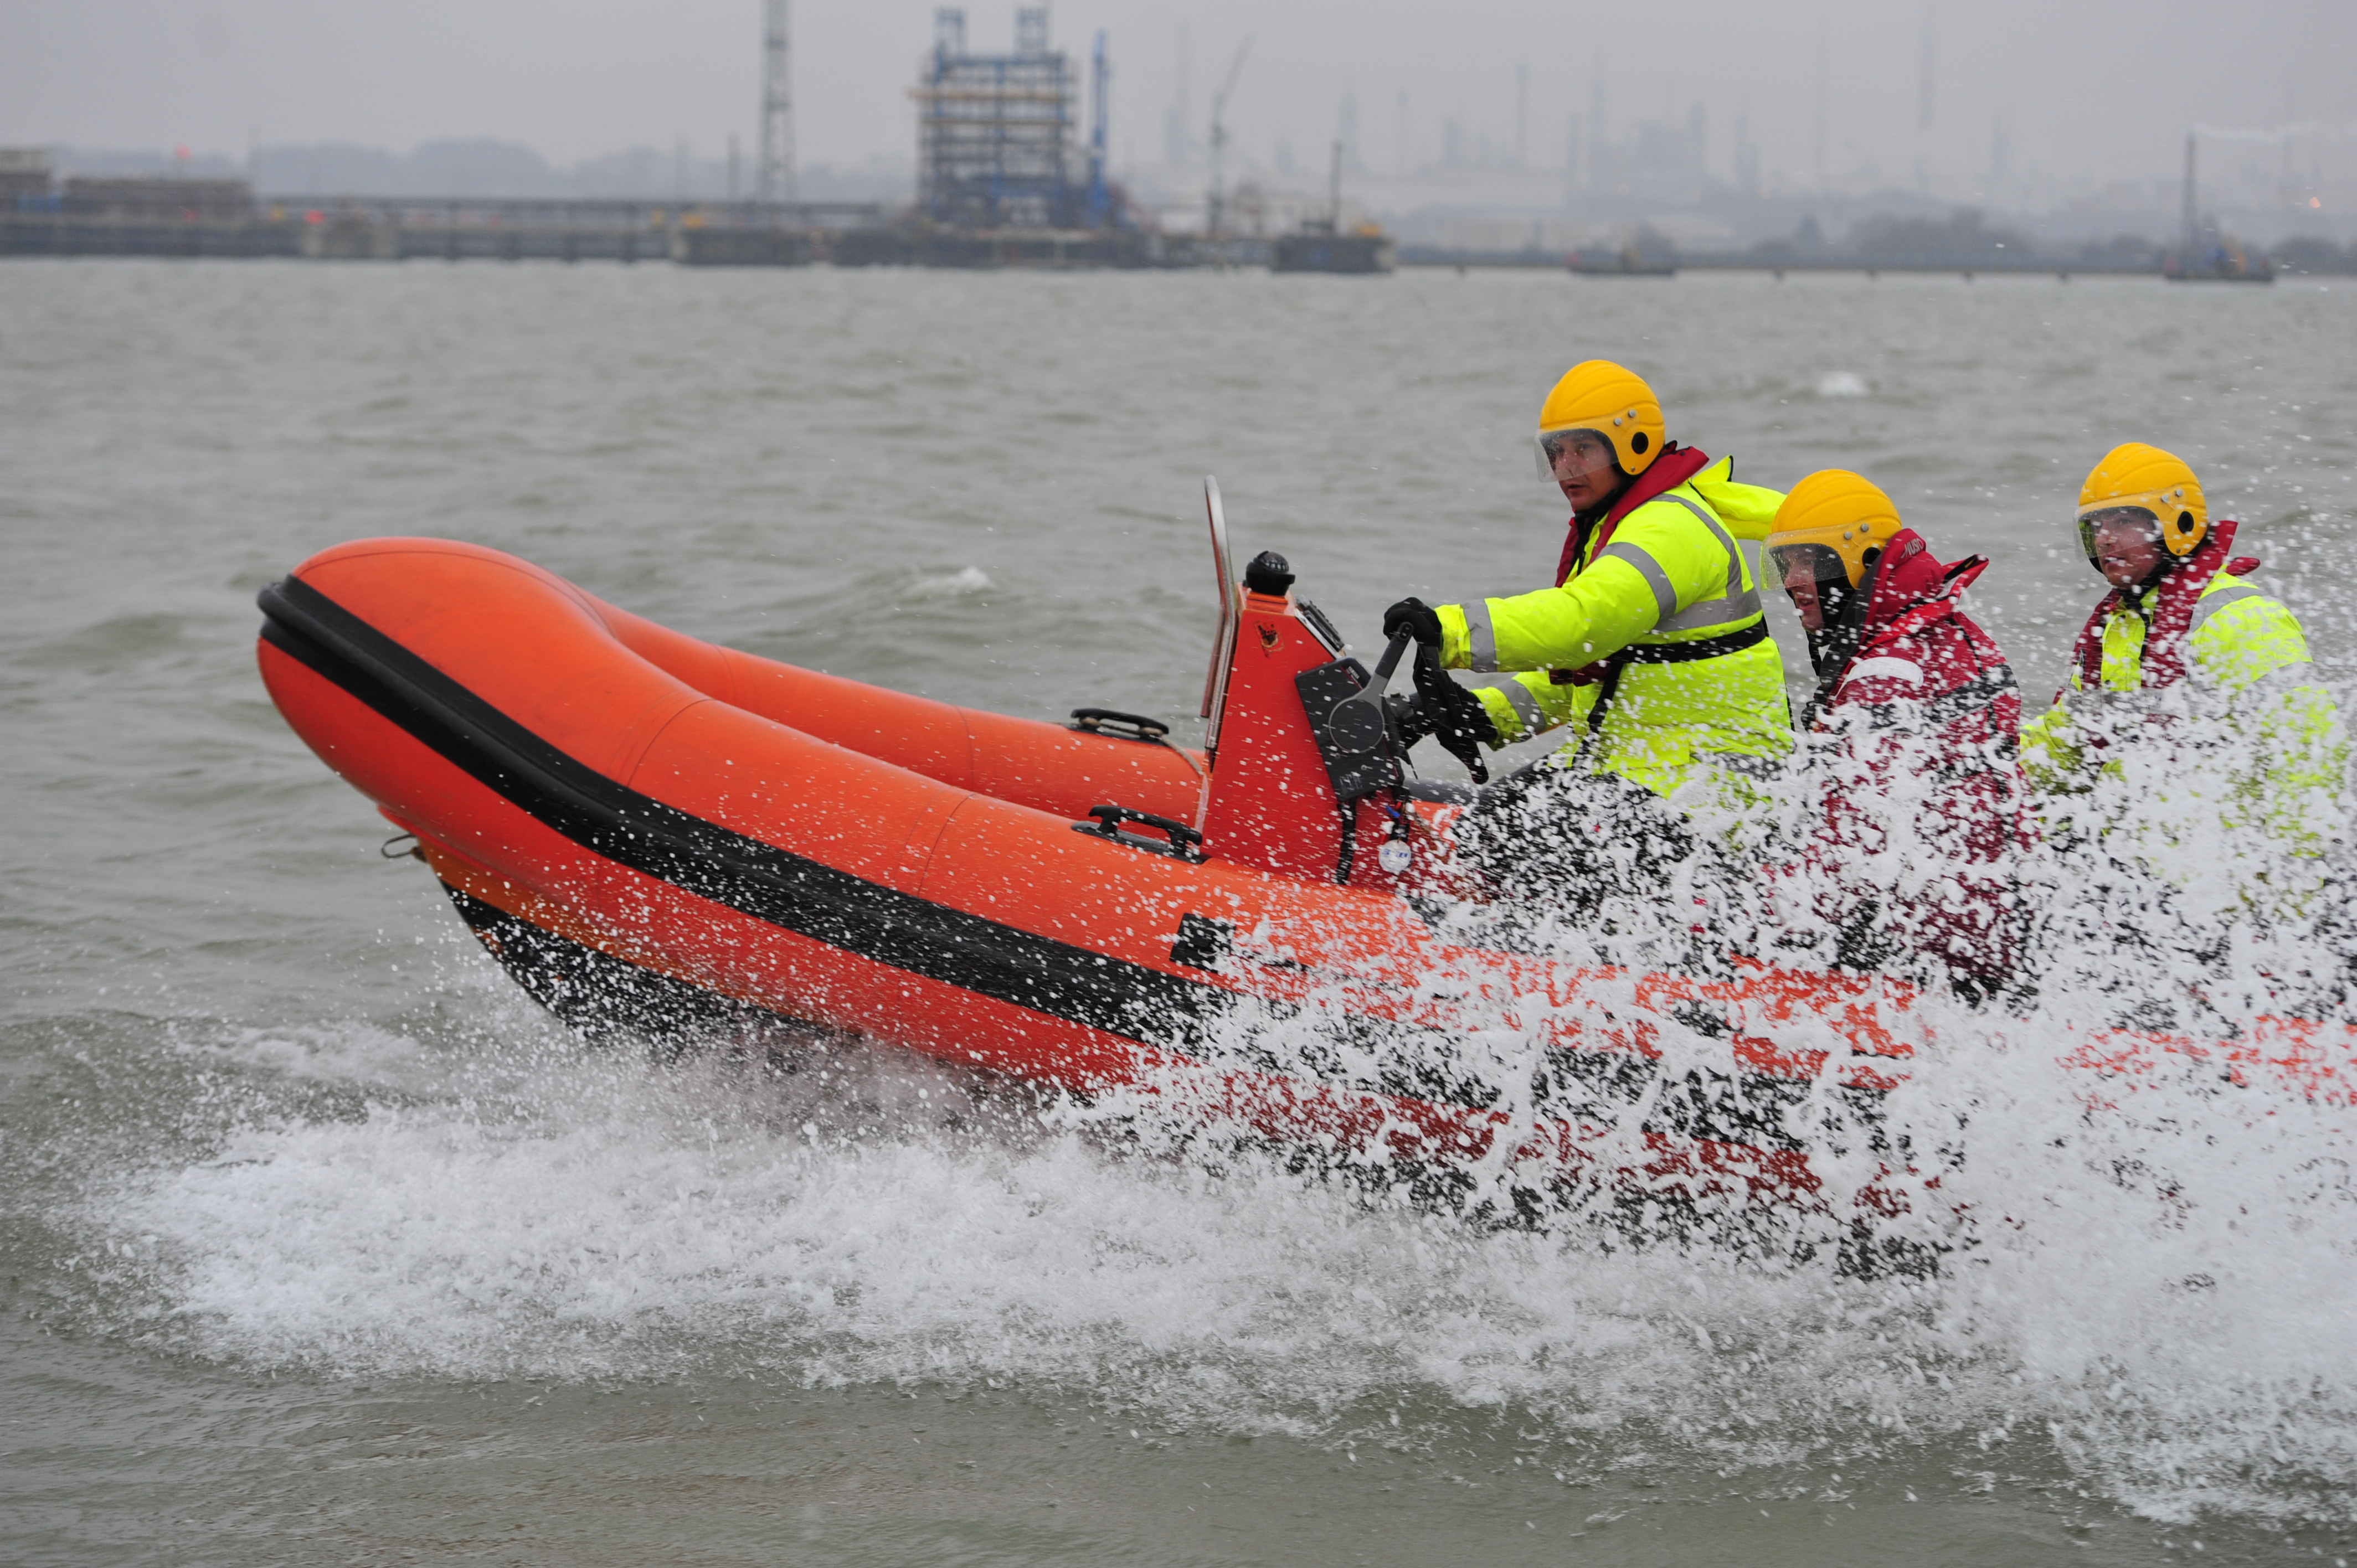 Rescue Boats (STCW) course is designed for crew who have had some prior pra...